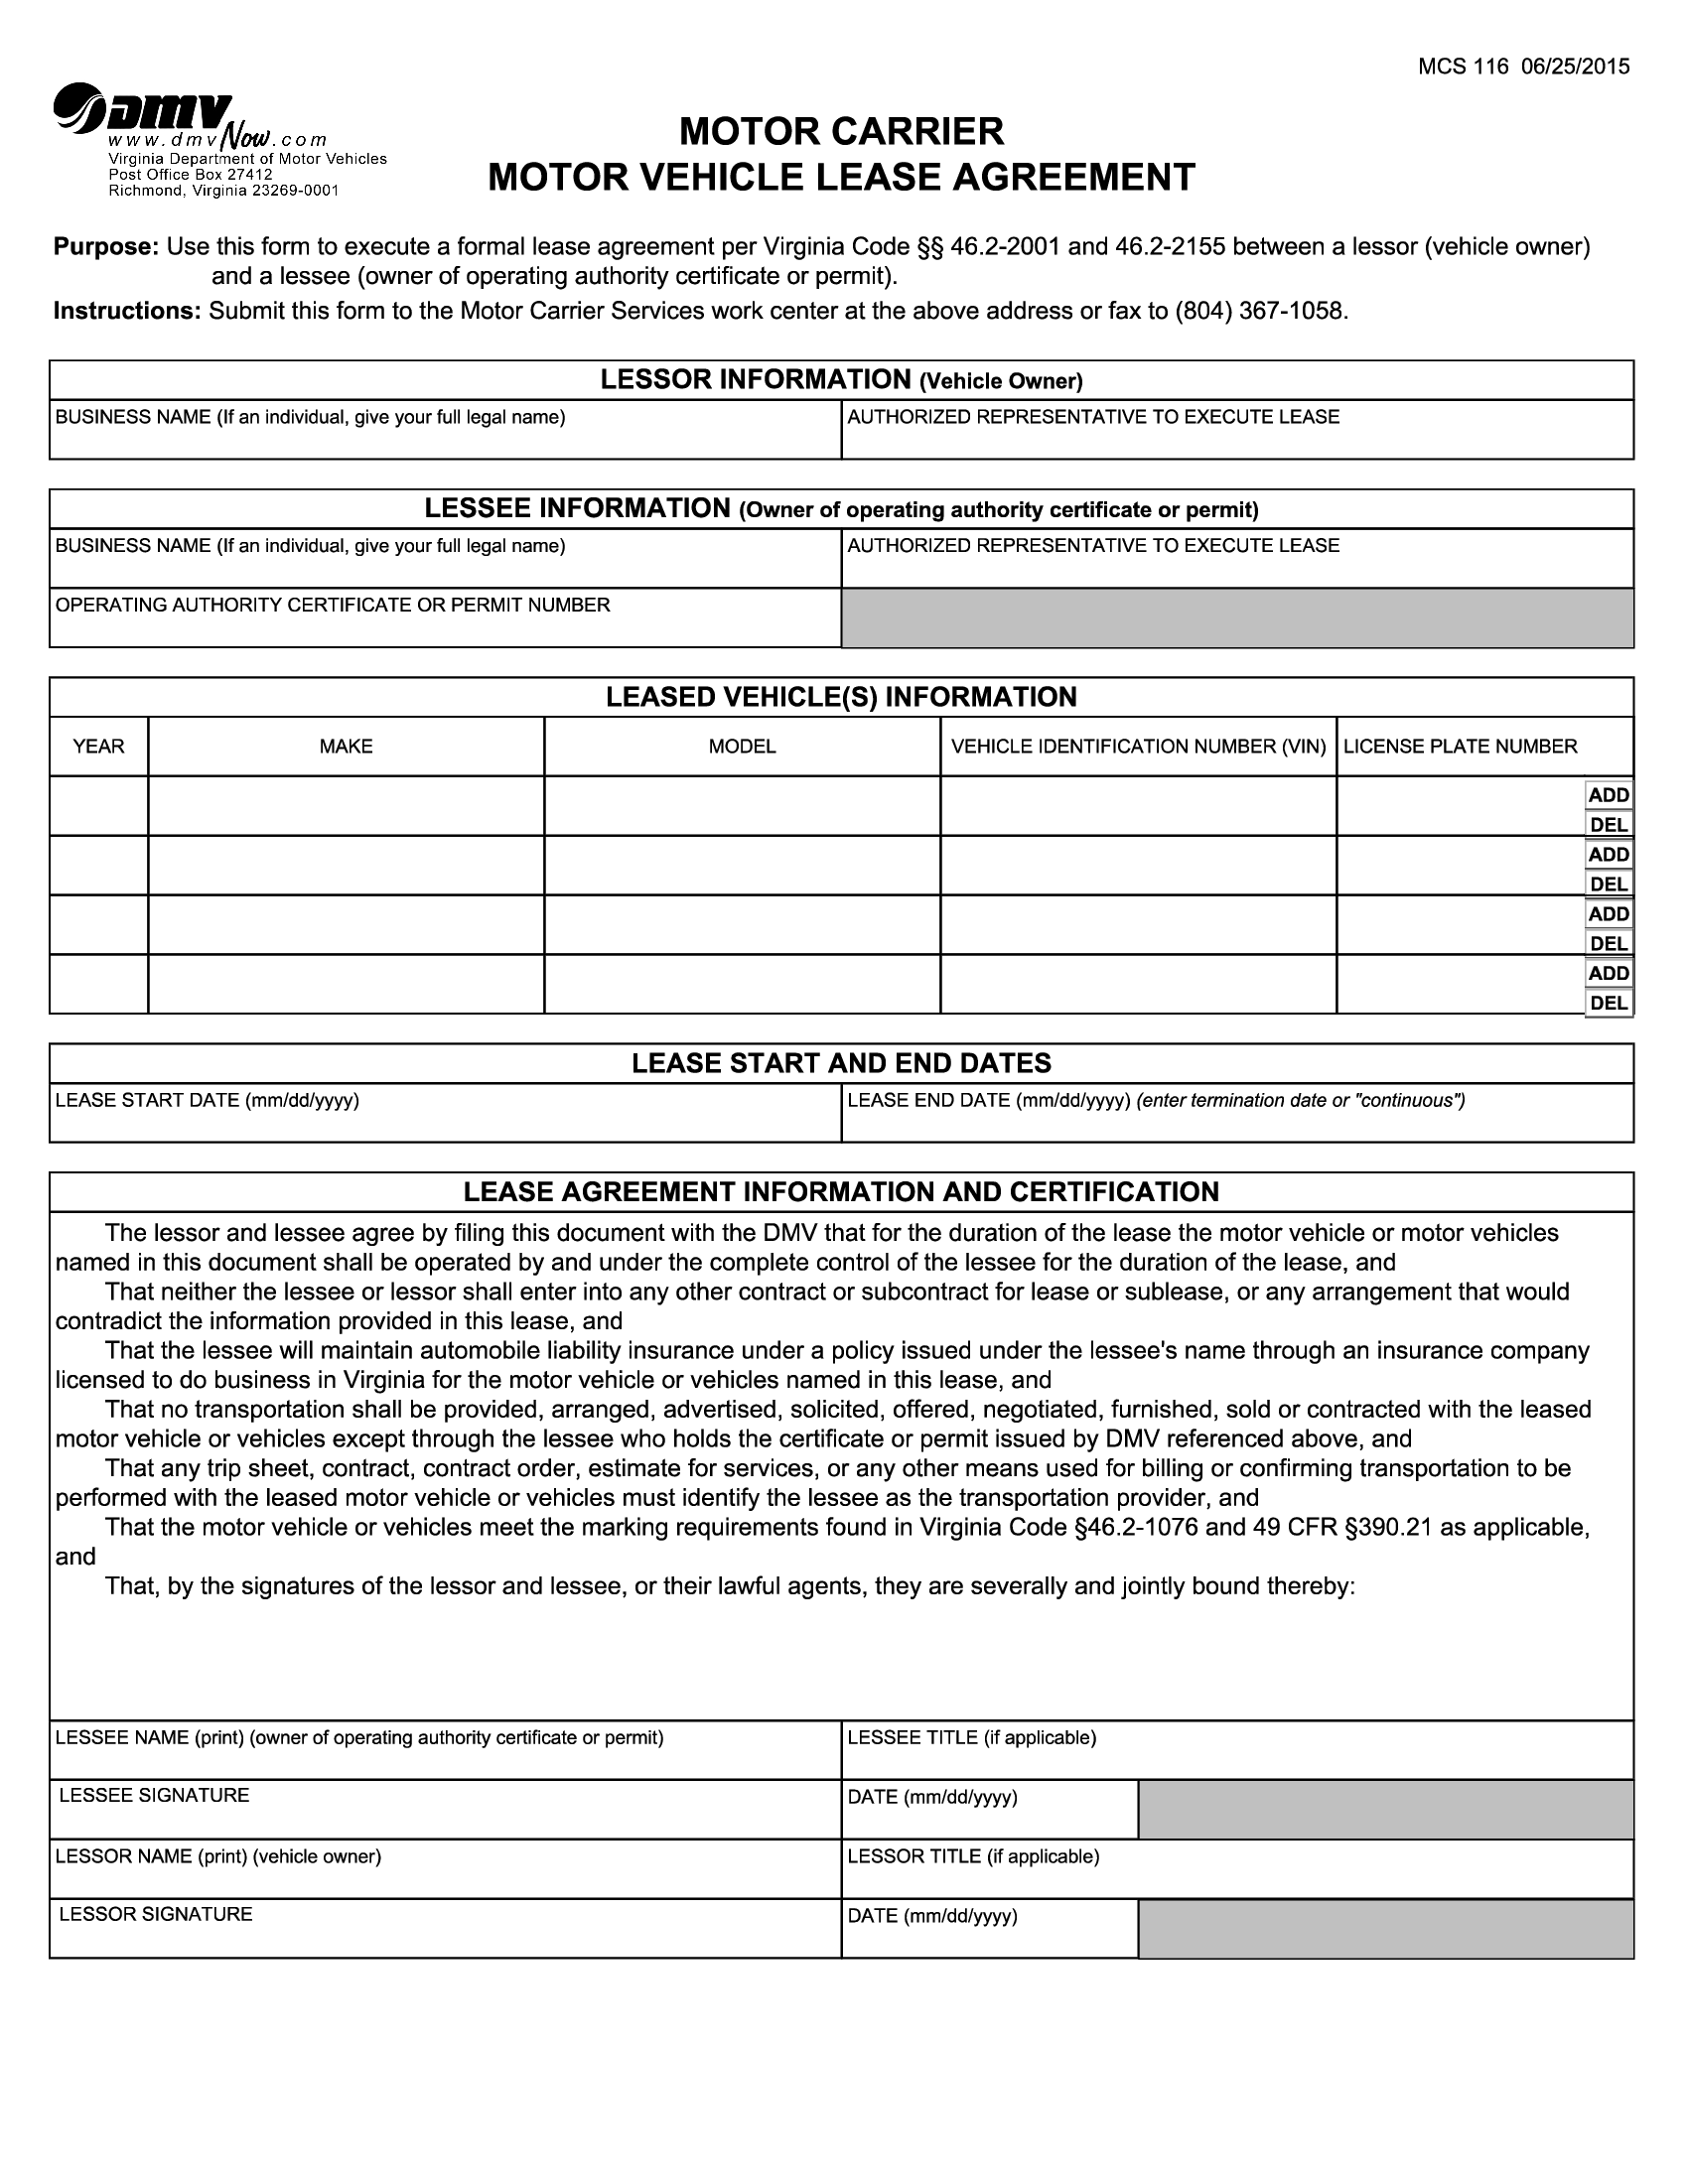 Form MCS 116. Motor Carrier Motor Vehicle Lease Agreement Forms